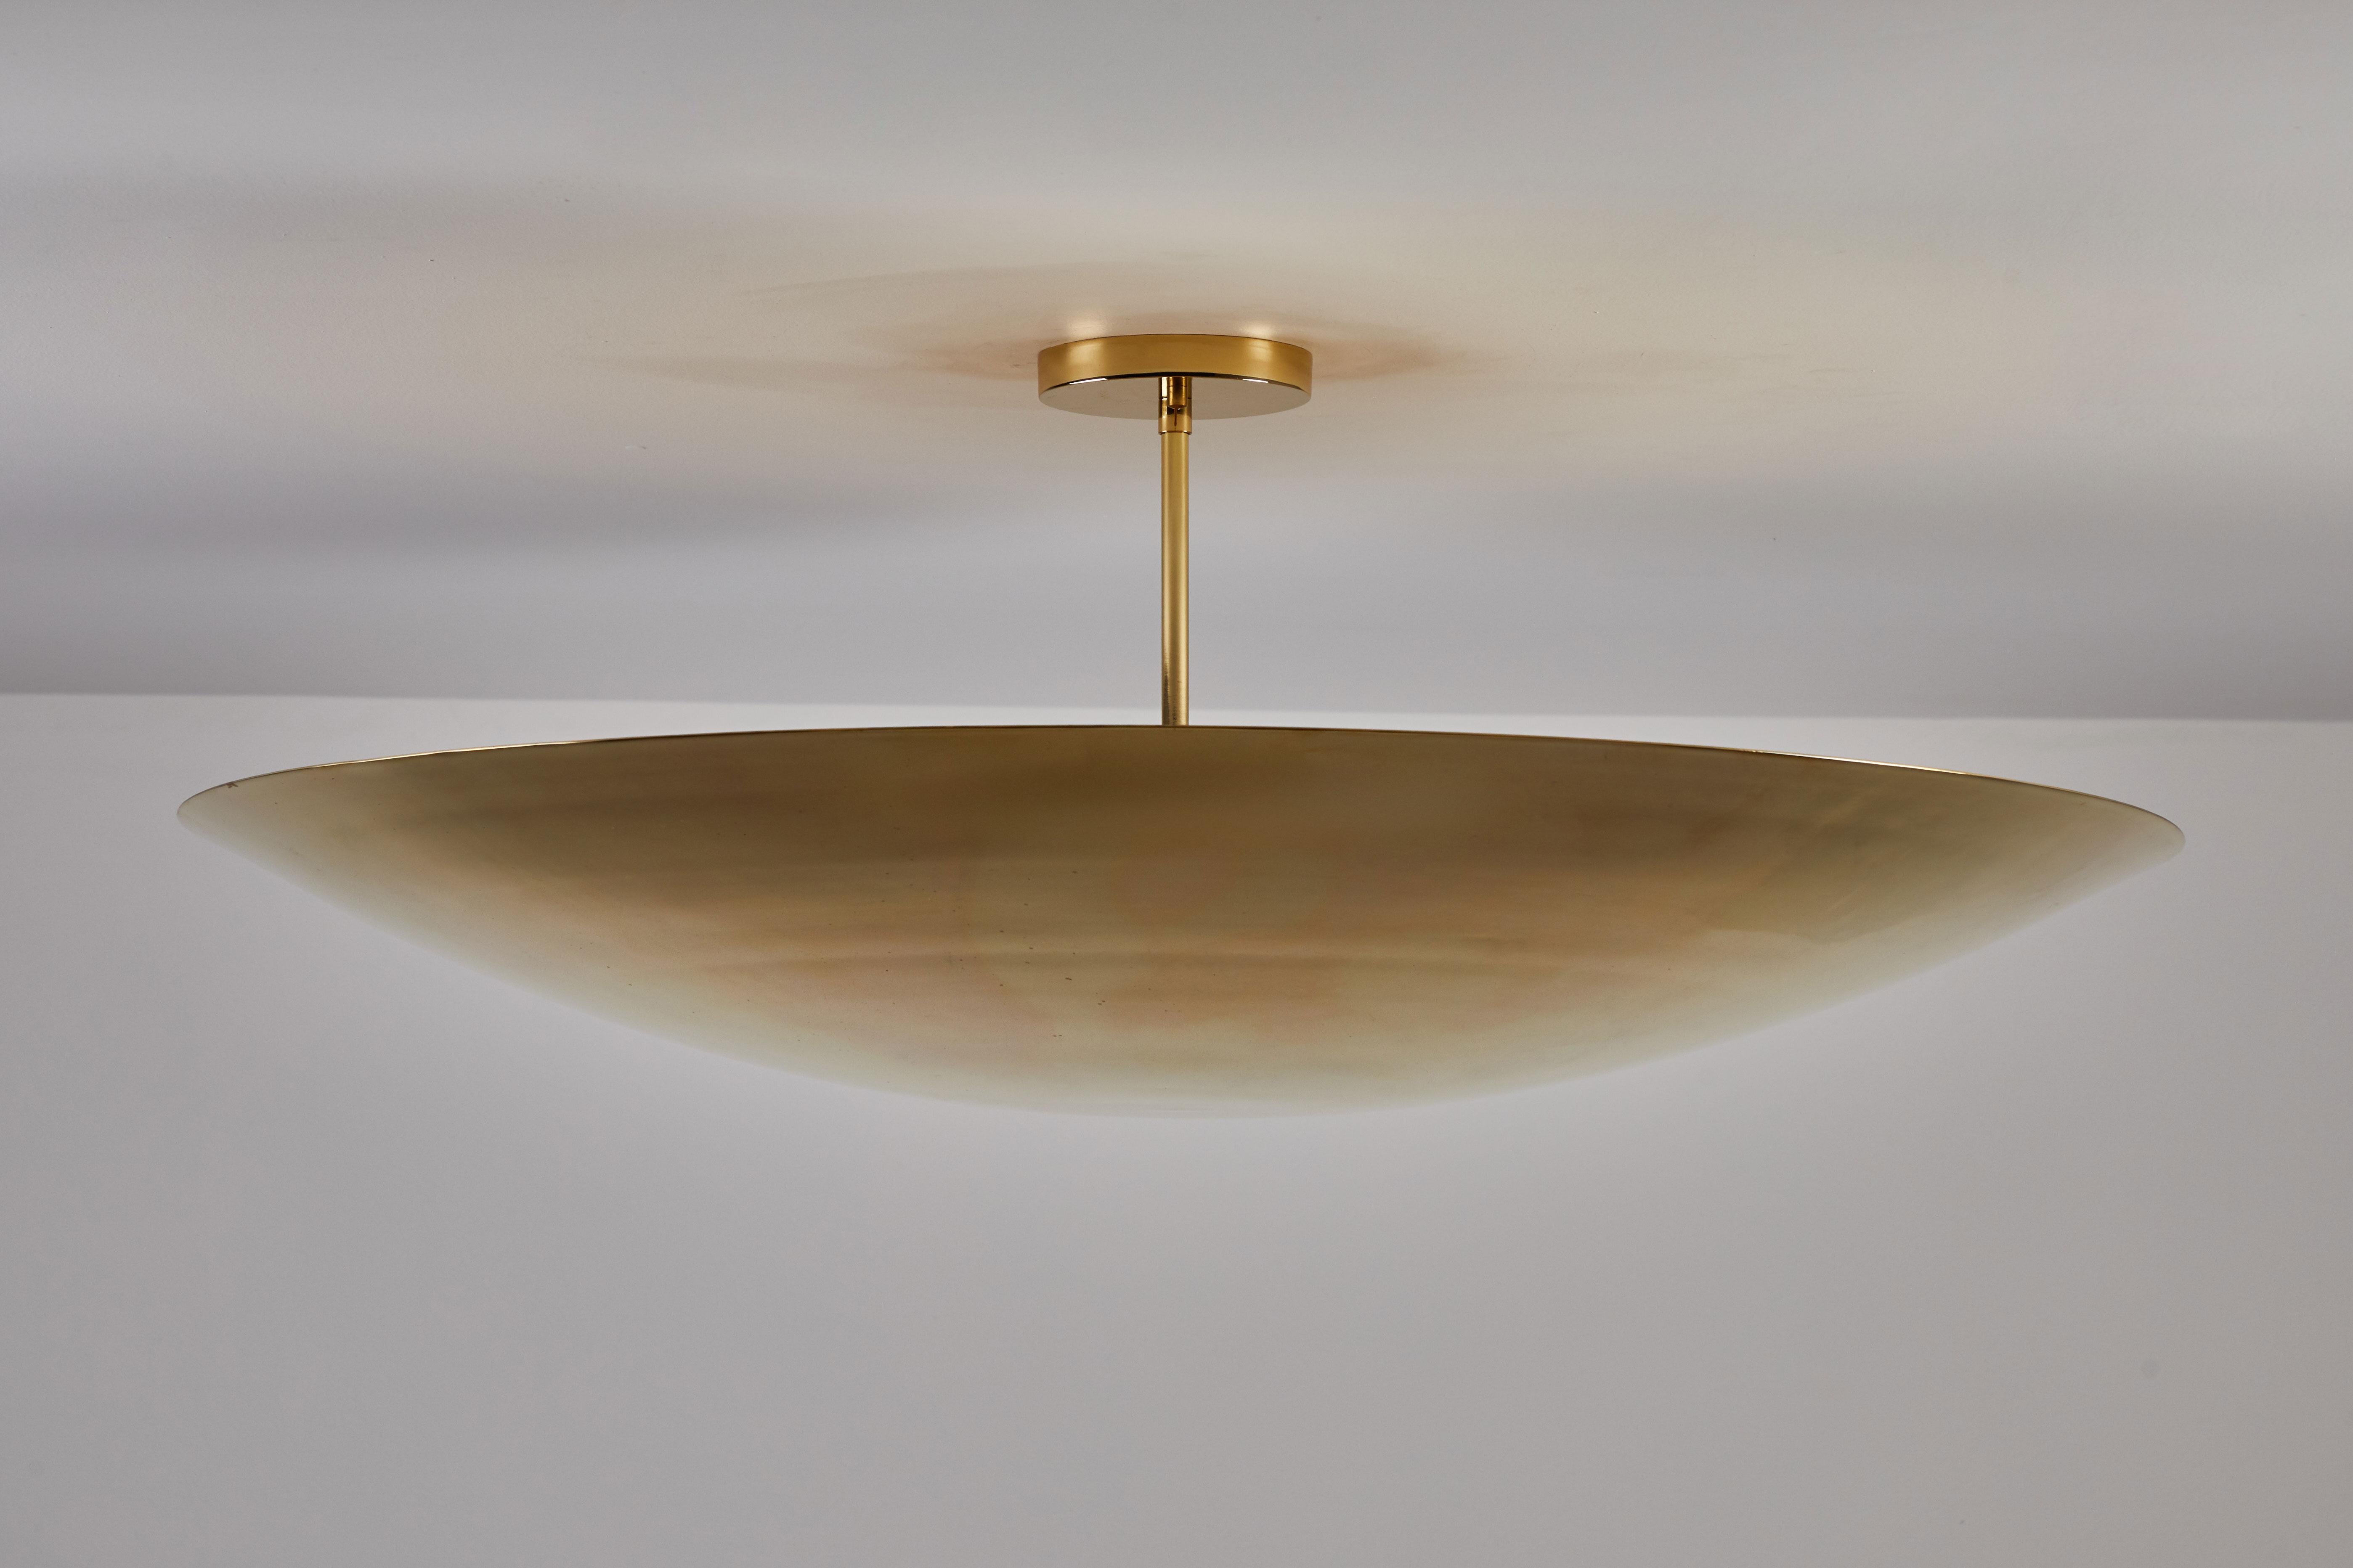 Rewire custom ceiling light. Designed and manufactured in Los Angeles by Rewire. Large un-lacquered brass dish with four internal sockets. Takes four E26 60w maximum bulbs. Brass hardware and canopy.
Brass Plated Steel.
